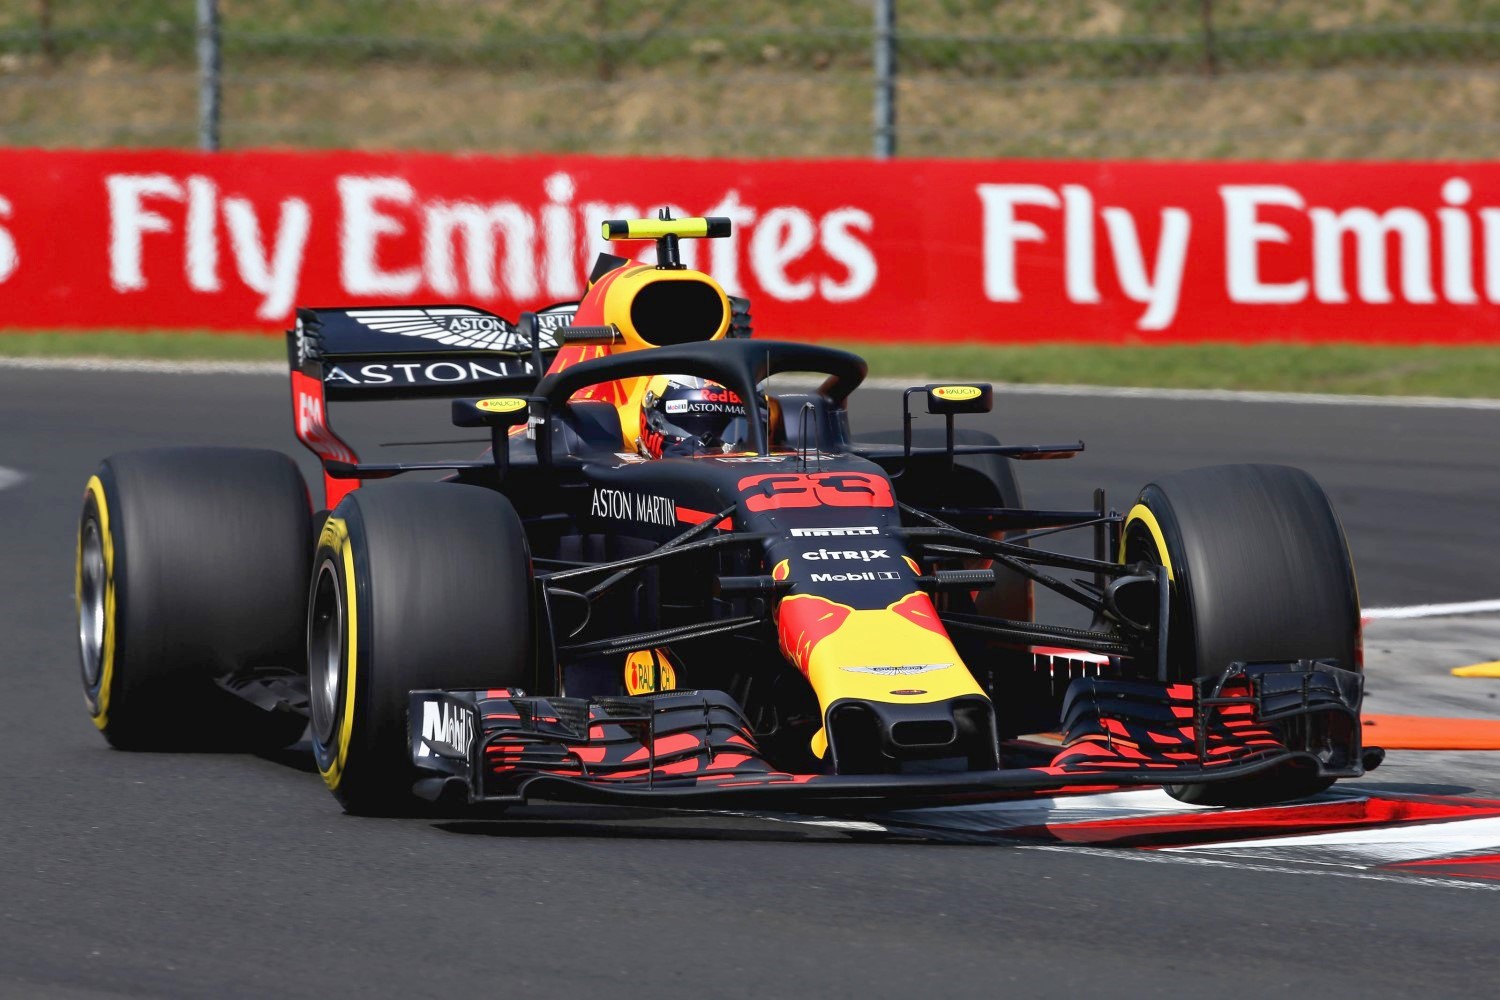 Max Verstappen lost power in his Renault in Hungary